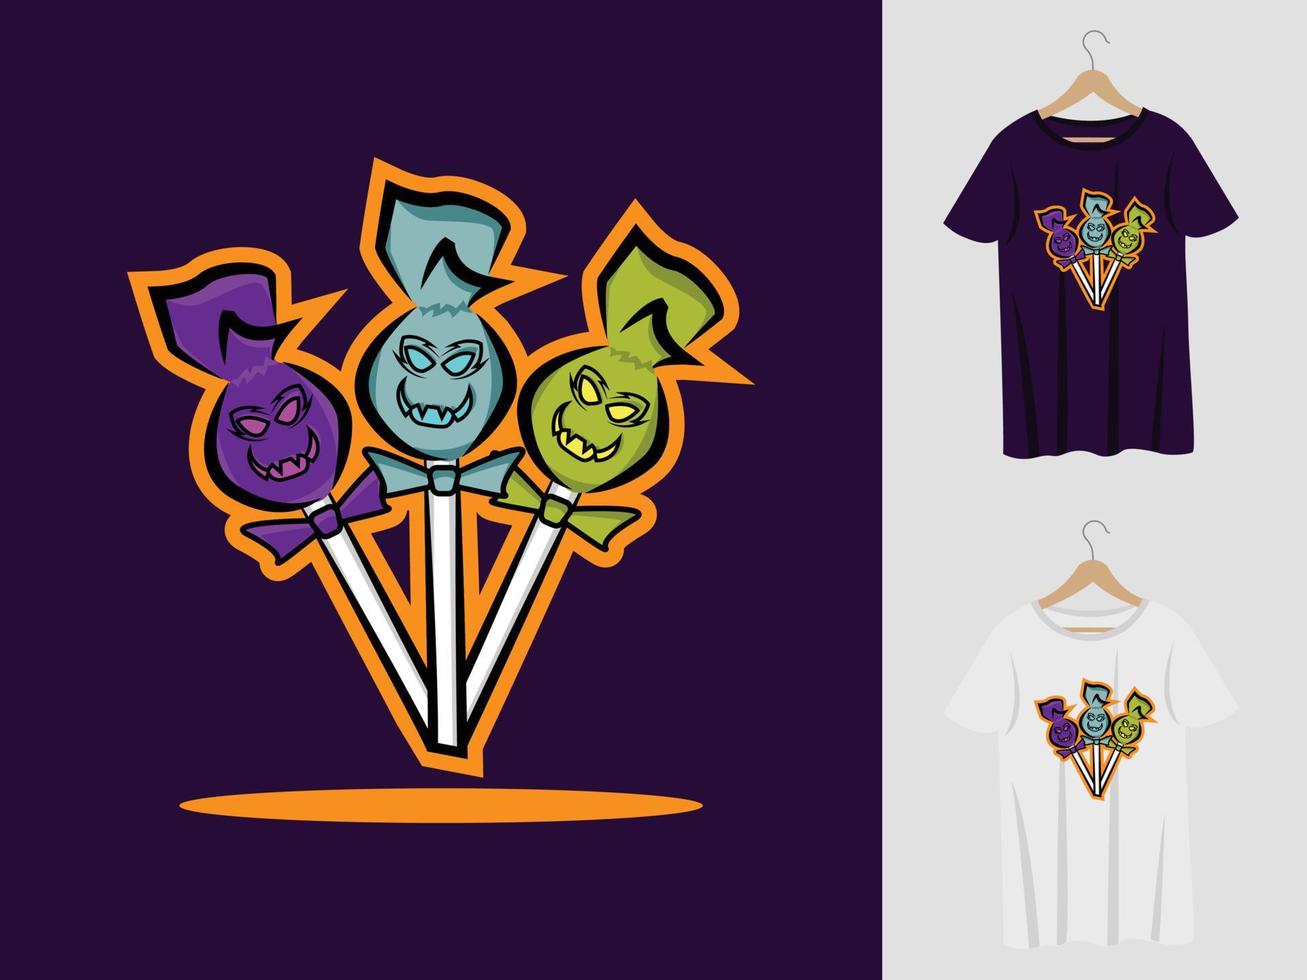 Lollipop Candy halloween mascot design with t-shirt . Lollipop illustration for halloween party and printing t-shirt vector